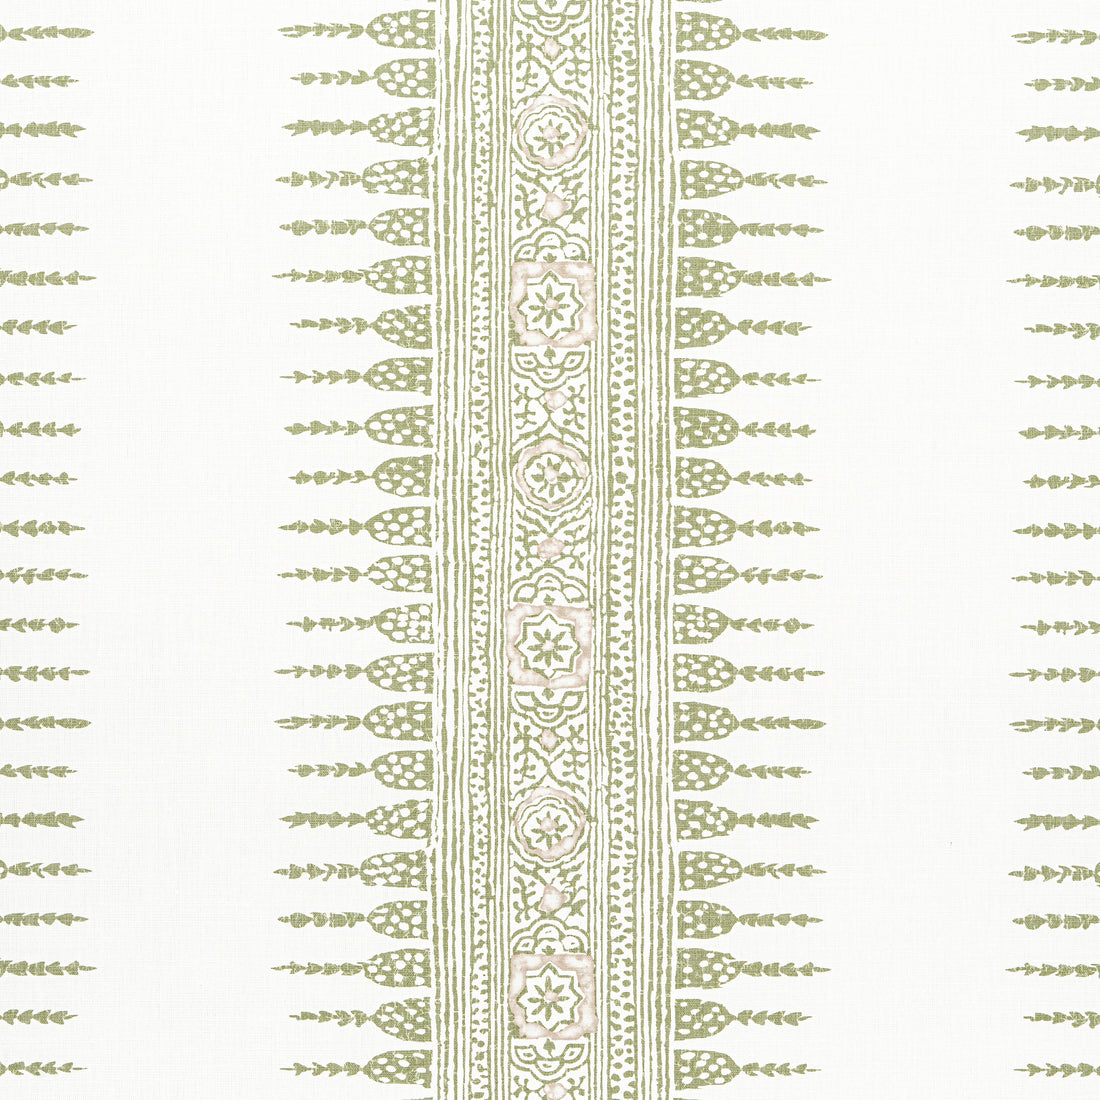 Javanese Stripe fabric in green and white color - pattern number AF15136 - by Anna French in the Antilles collection